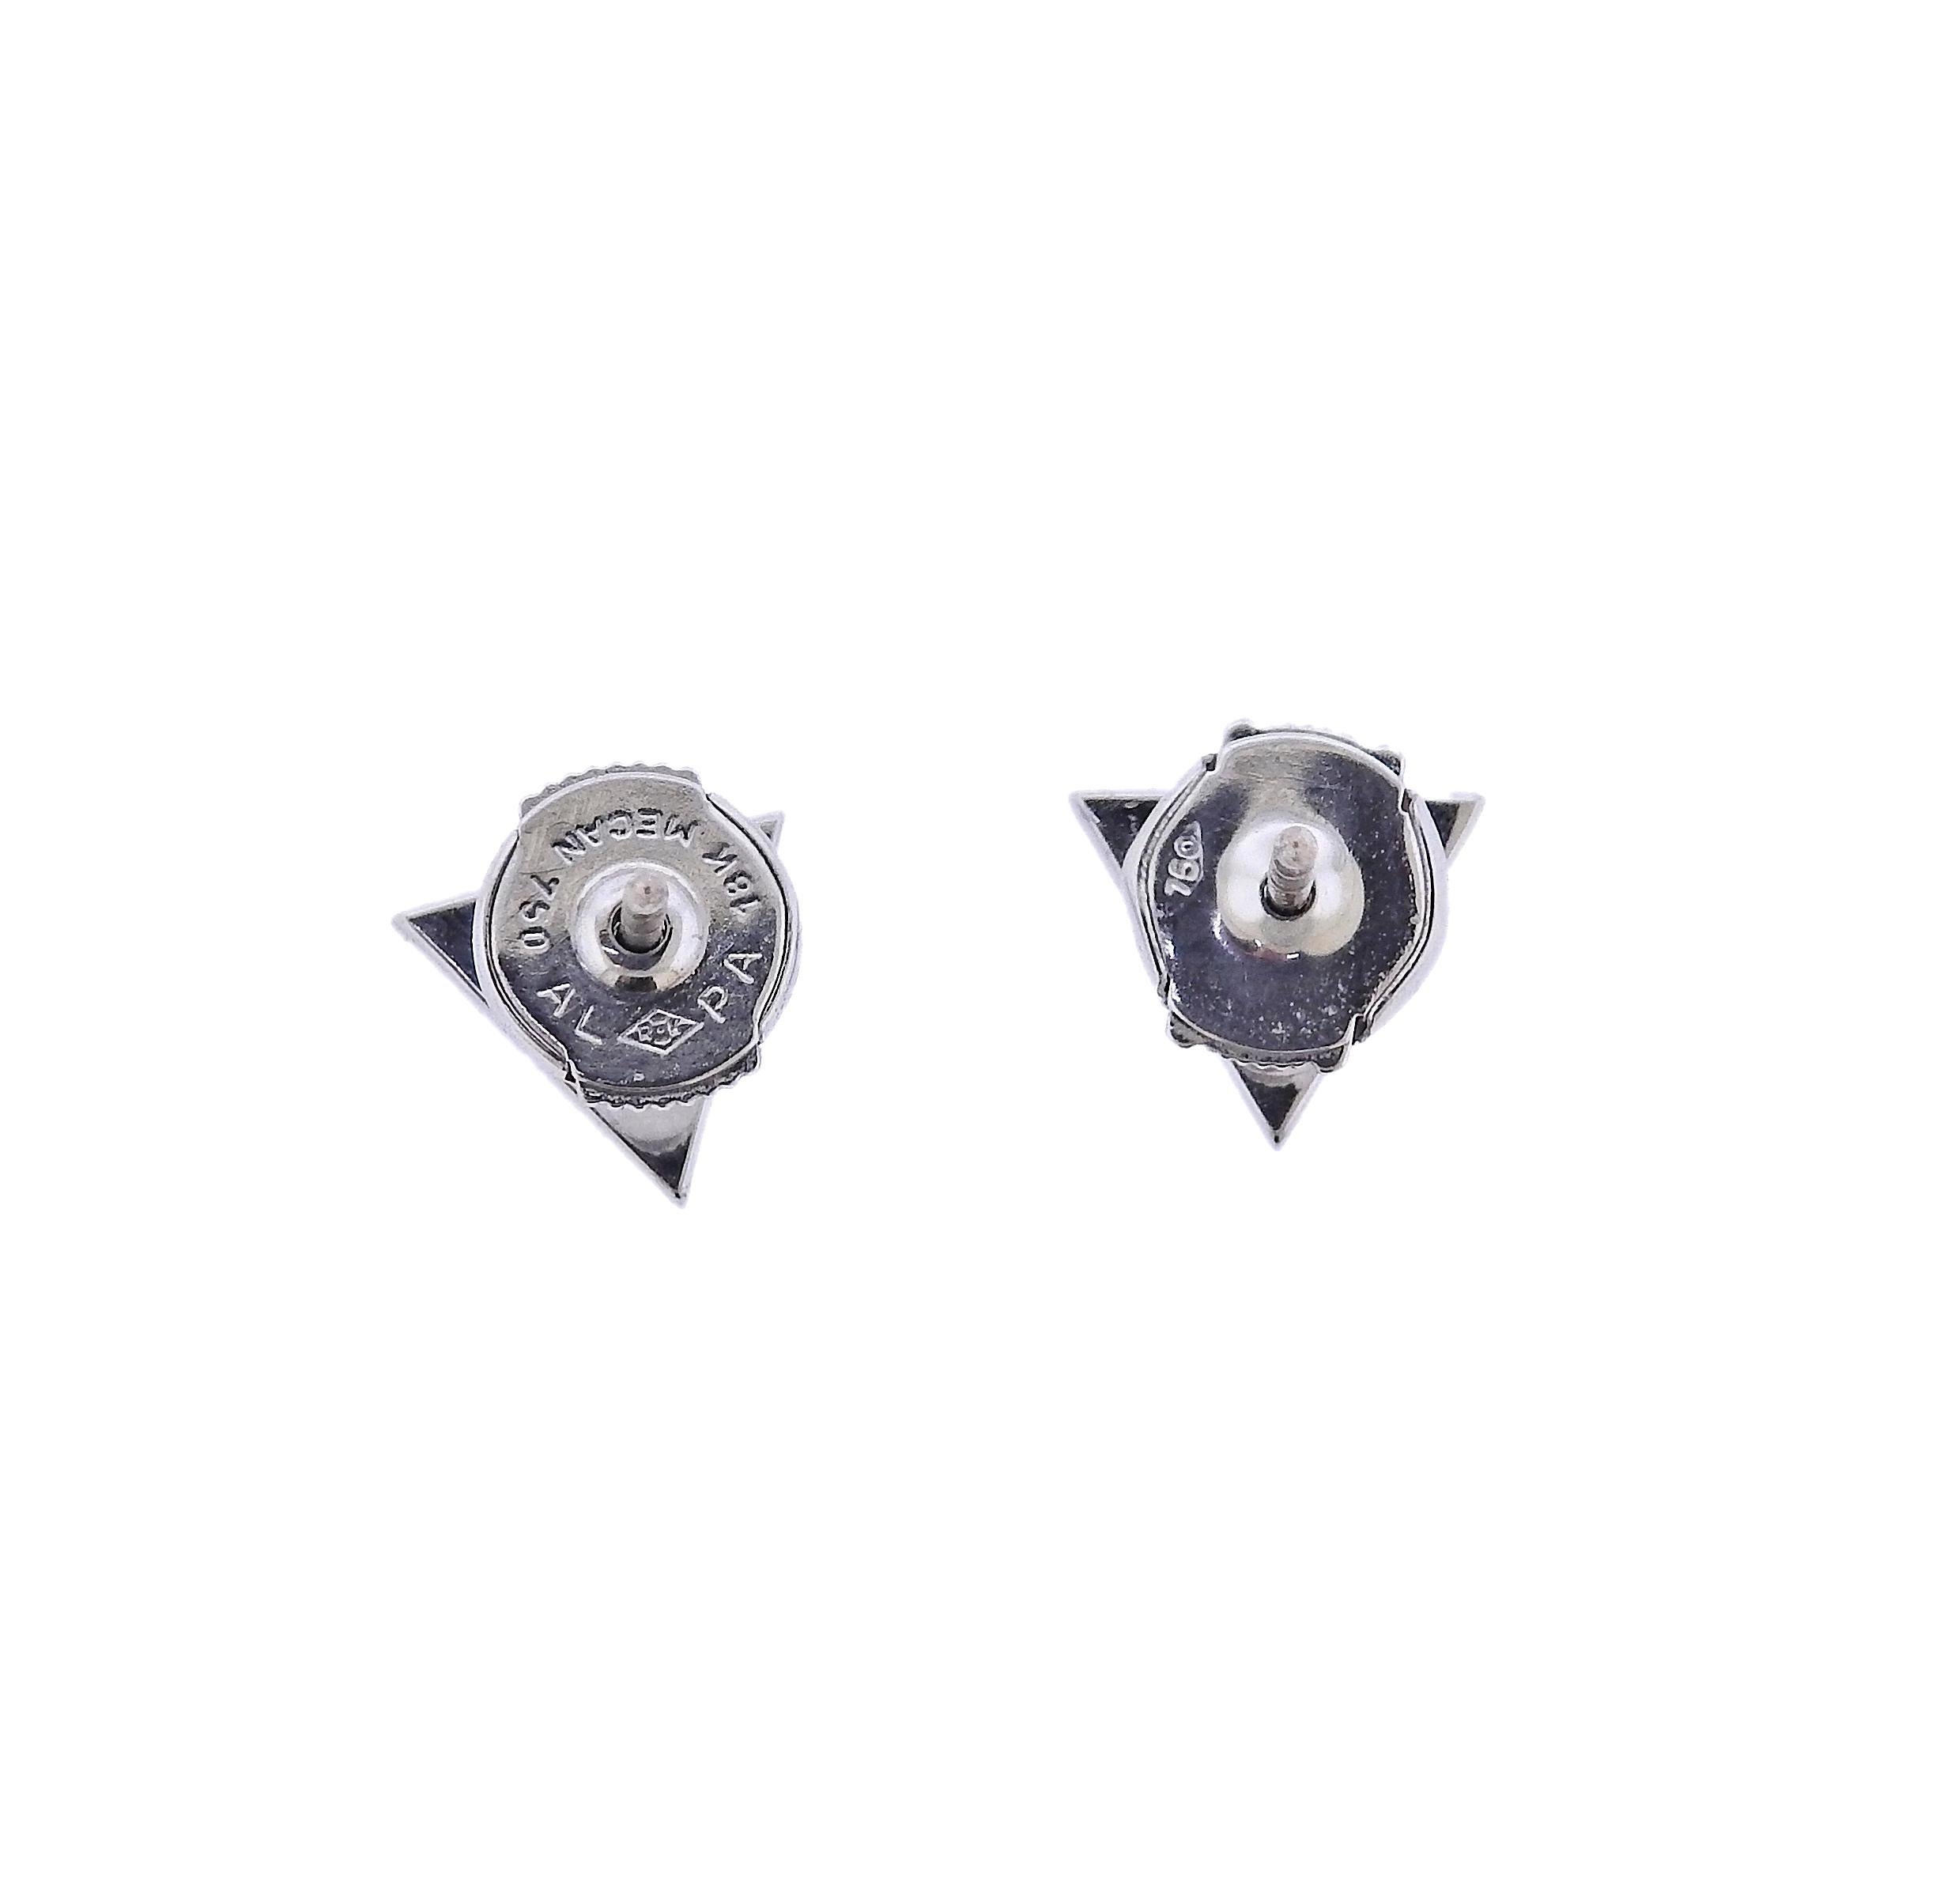 18k white gold Thea collection stud earrings by Messika, set with 0.28ctw G/VS diamonds. Retail Value $2600. Store sample, box. Earrings are 9mm x 9mm , weight 2.3 grams. Marked: Messika, 750, D 0.28 .